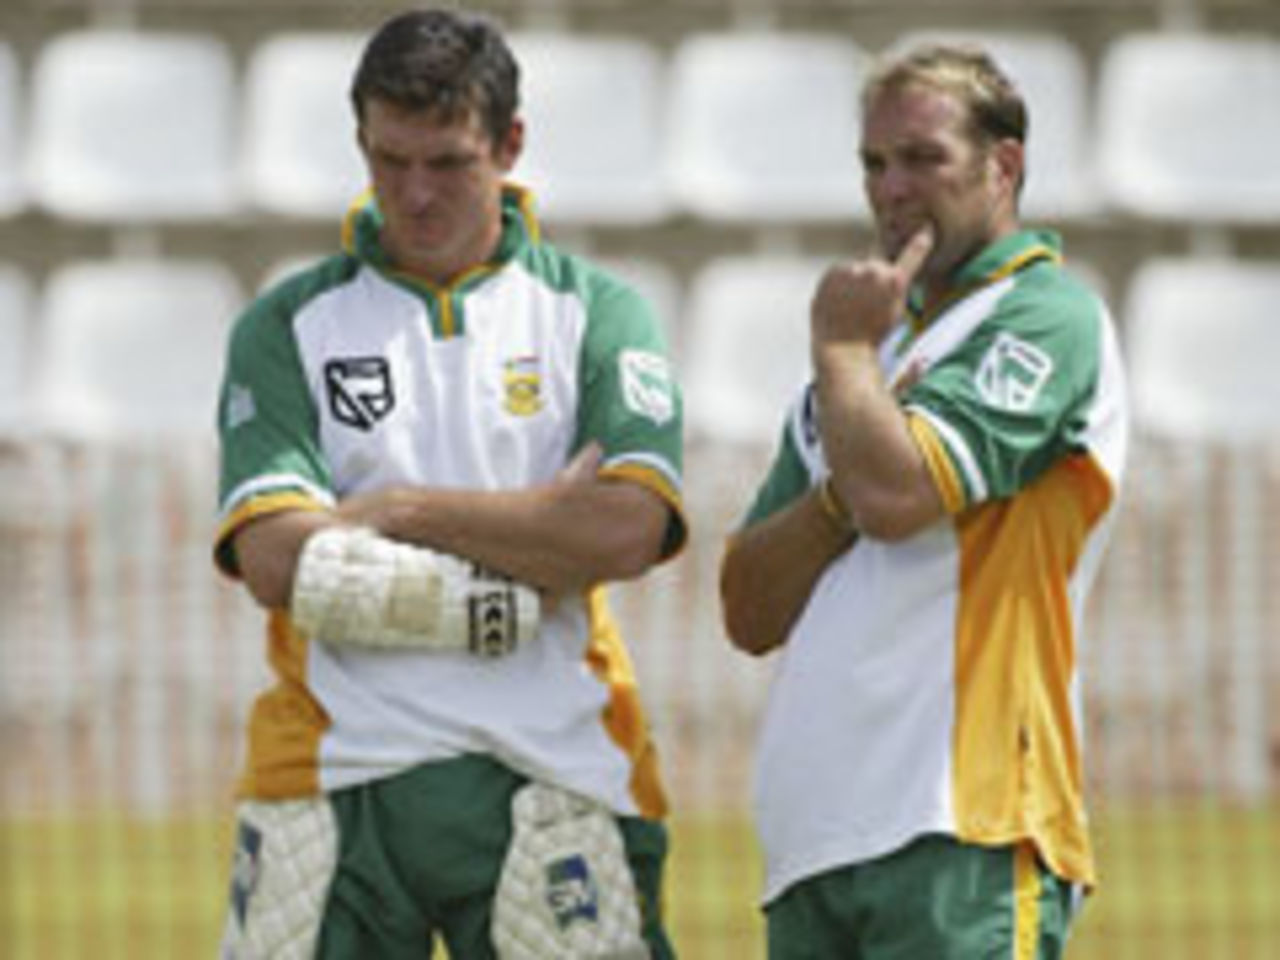 Calm before the storm: Graeme Smith and Jacques Kallis prepare for the NatWest Series final against England at Lord's